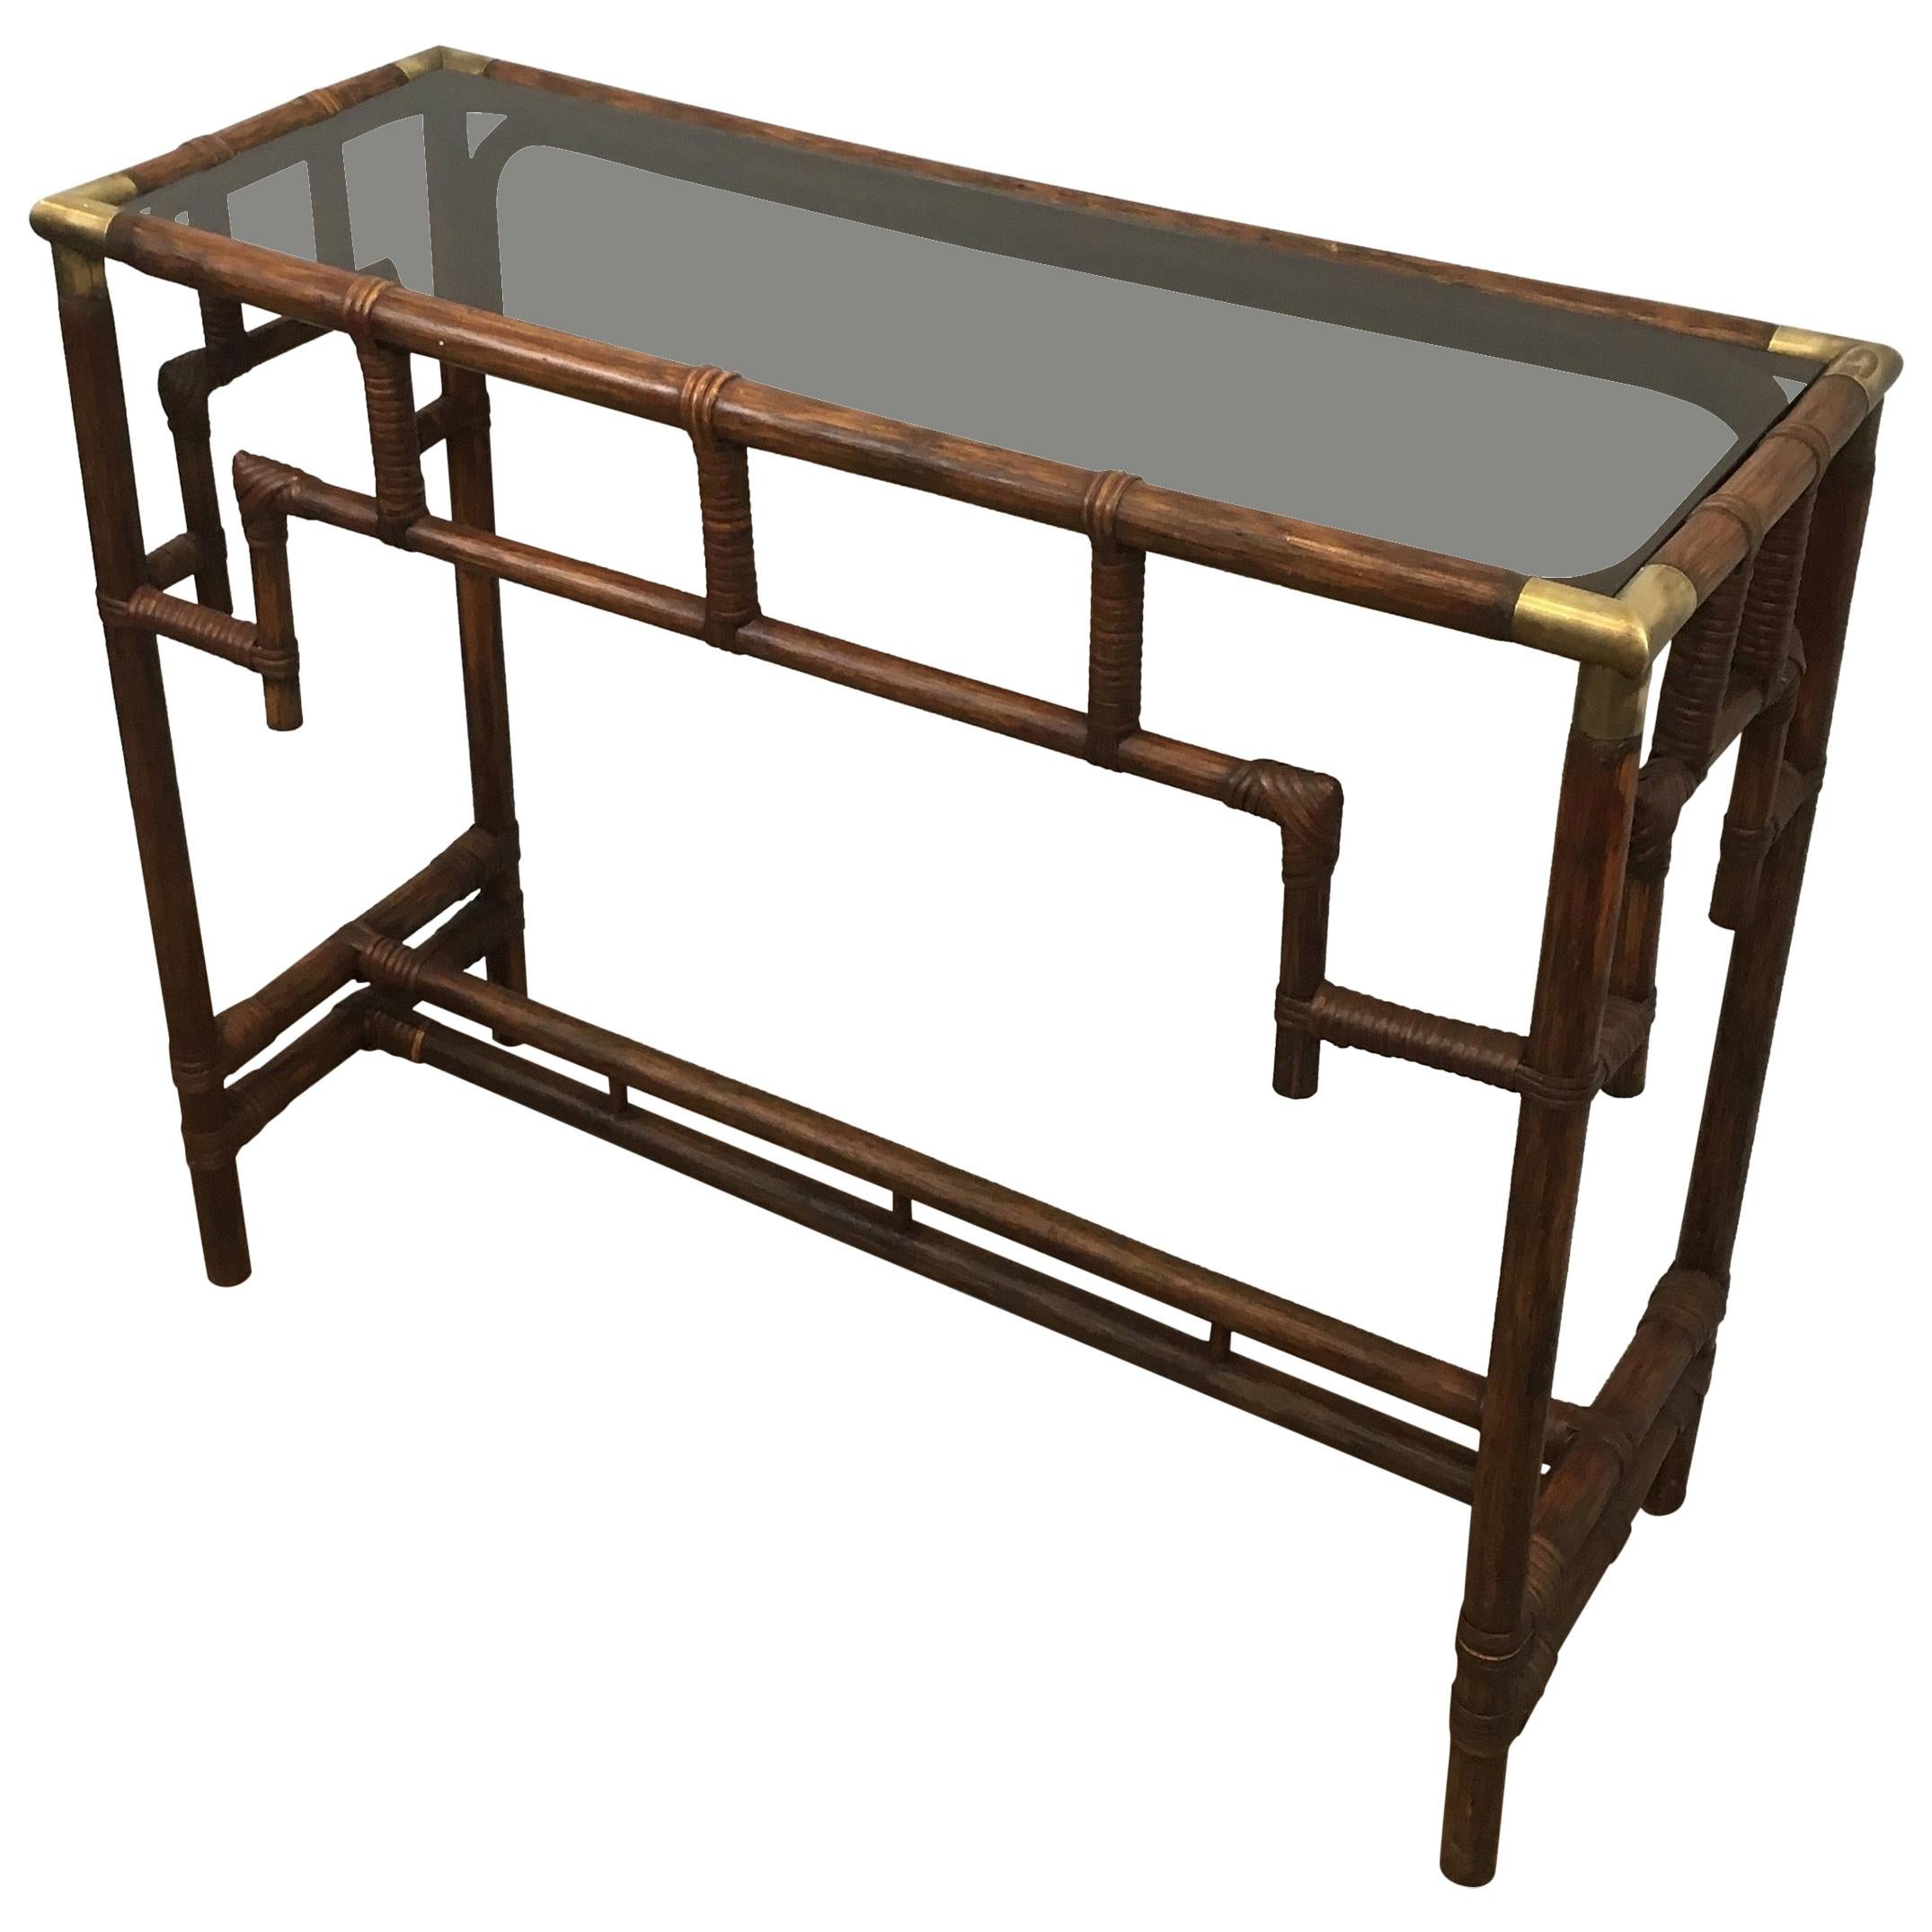 Bamboo Console Table with Brass Corners and Smoked Glass Shelf, French